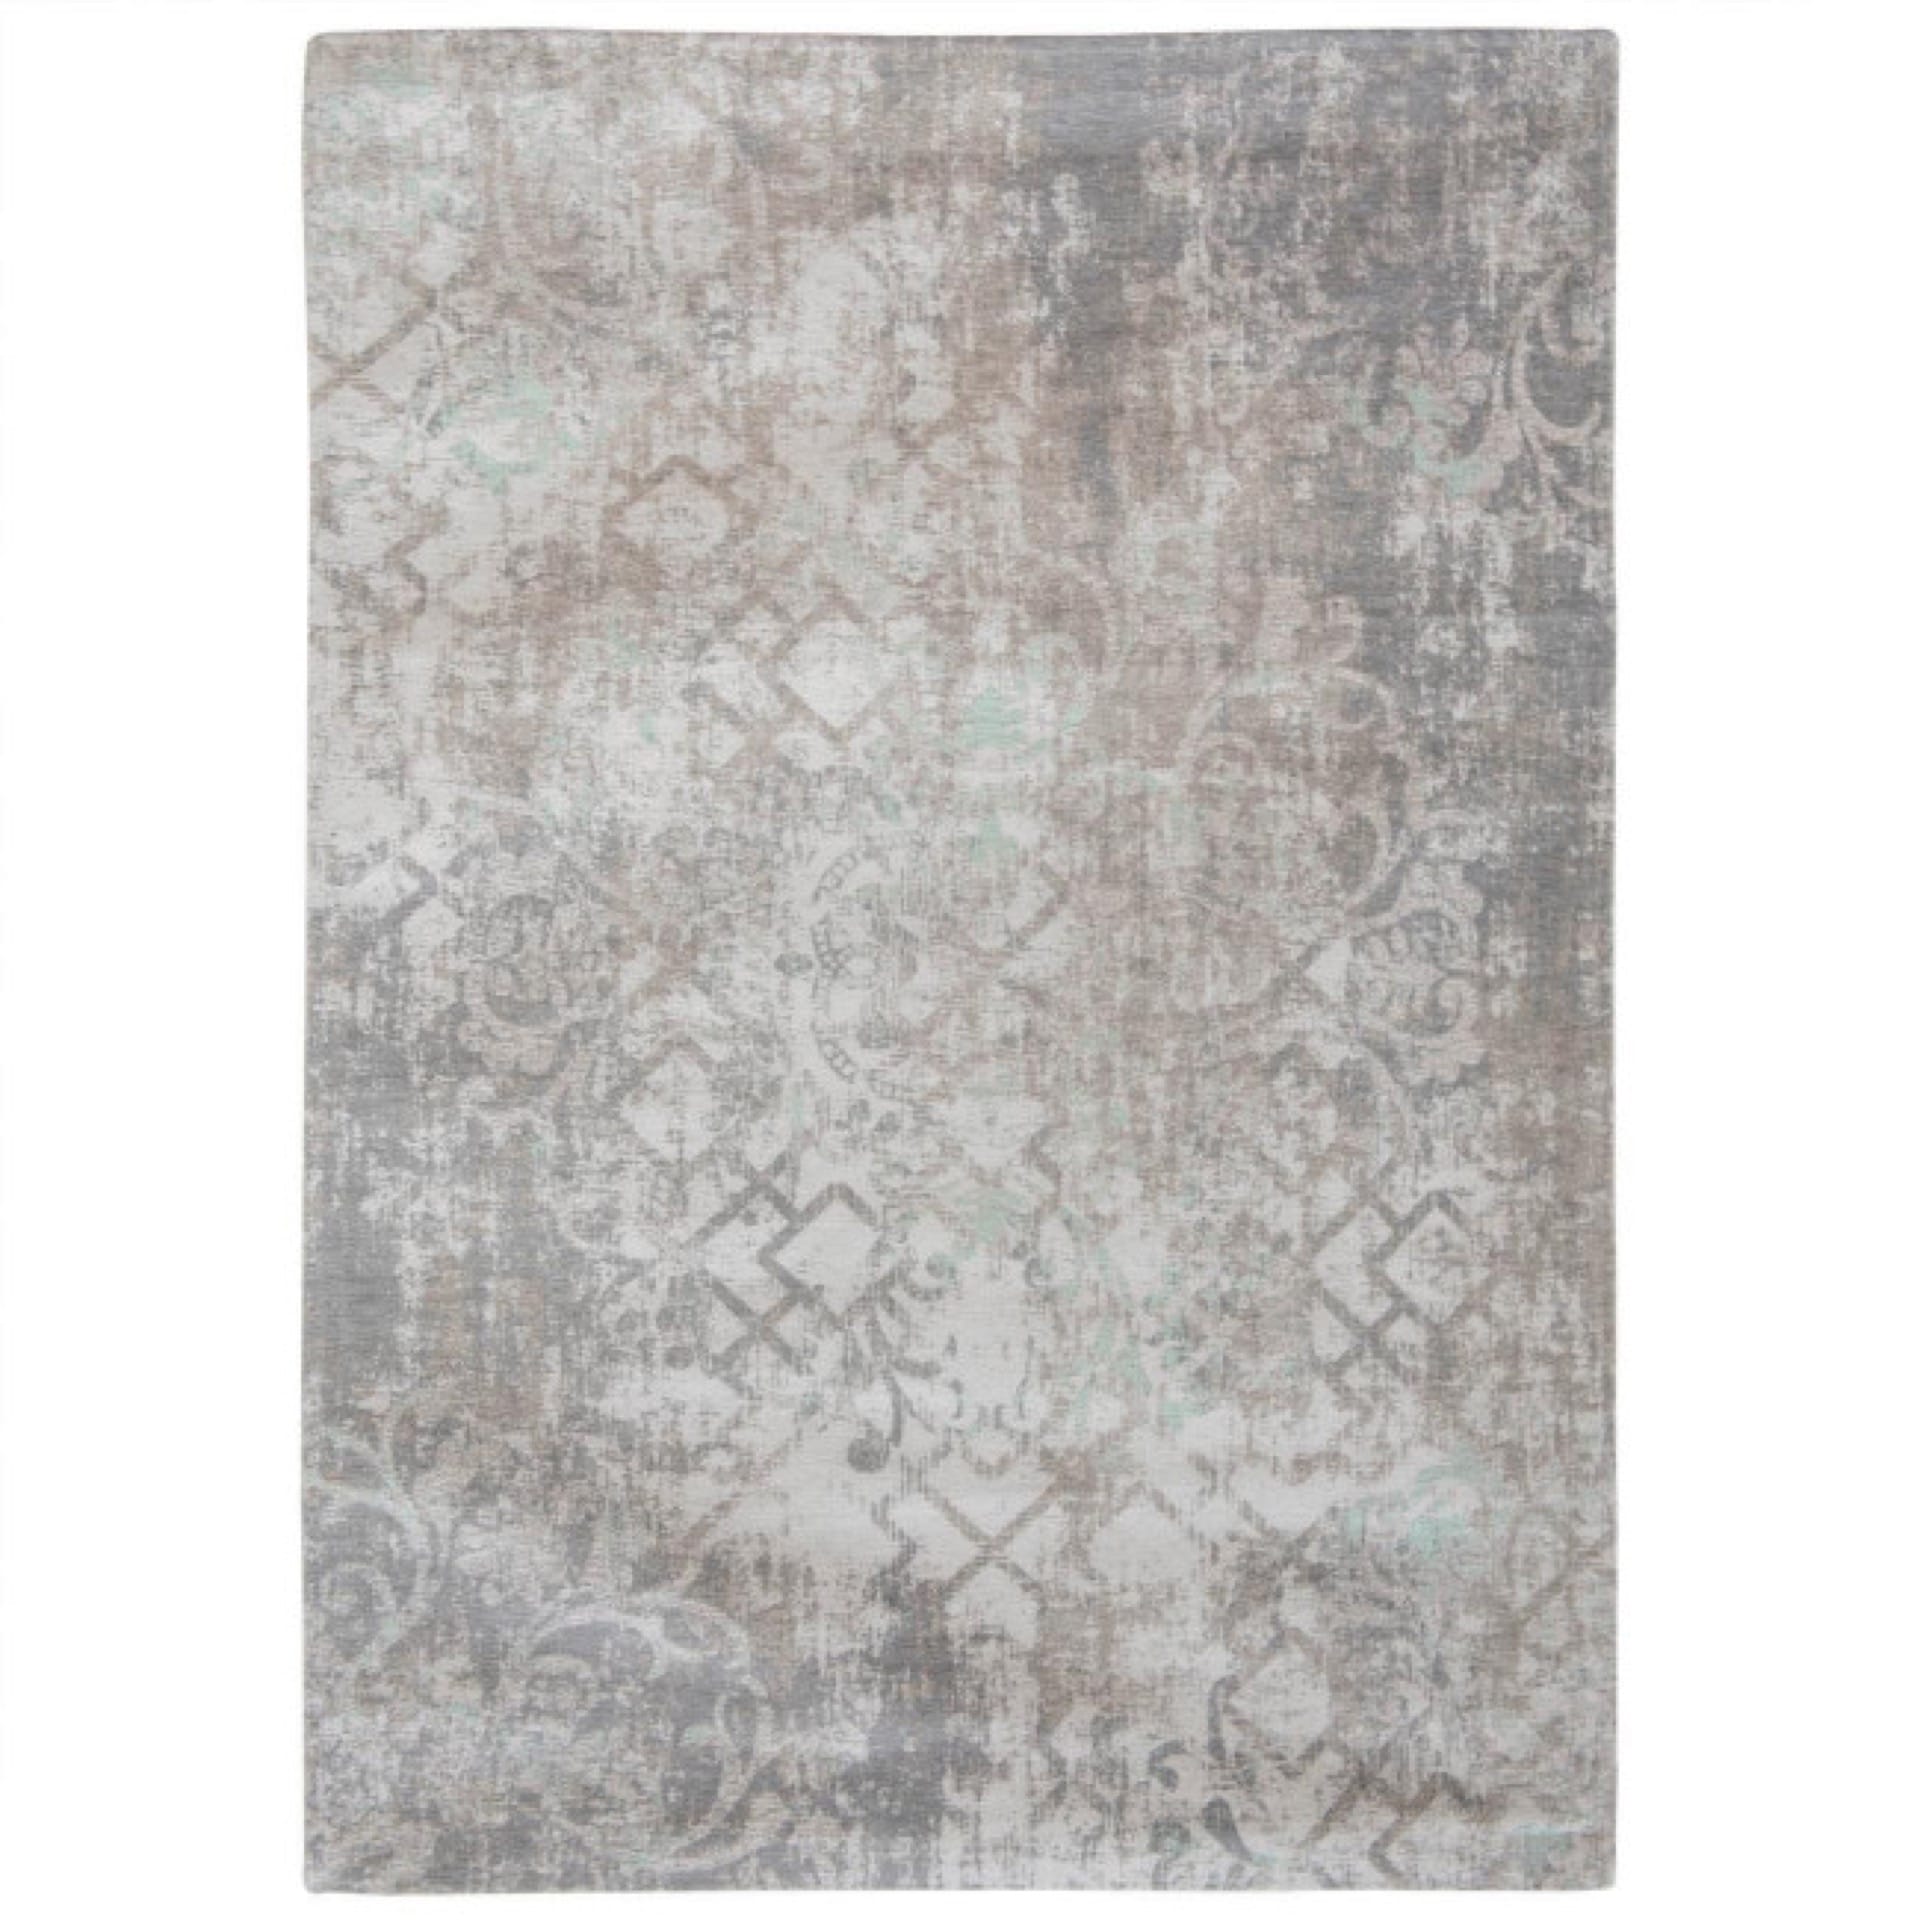 Fading World Collection Babylon Sherbet 8547 rug by Louis De Poortere